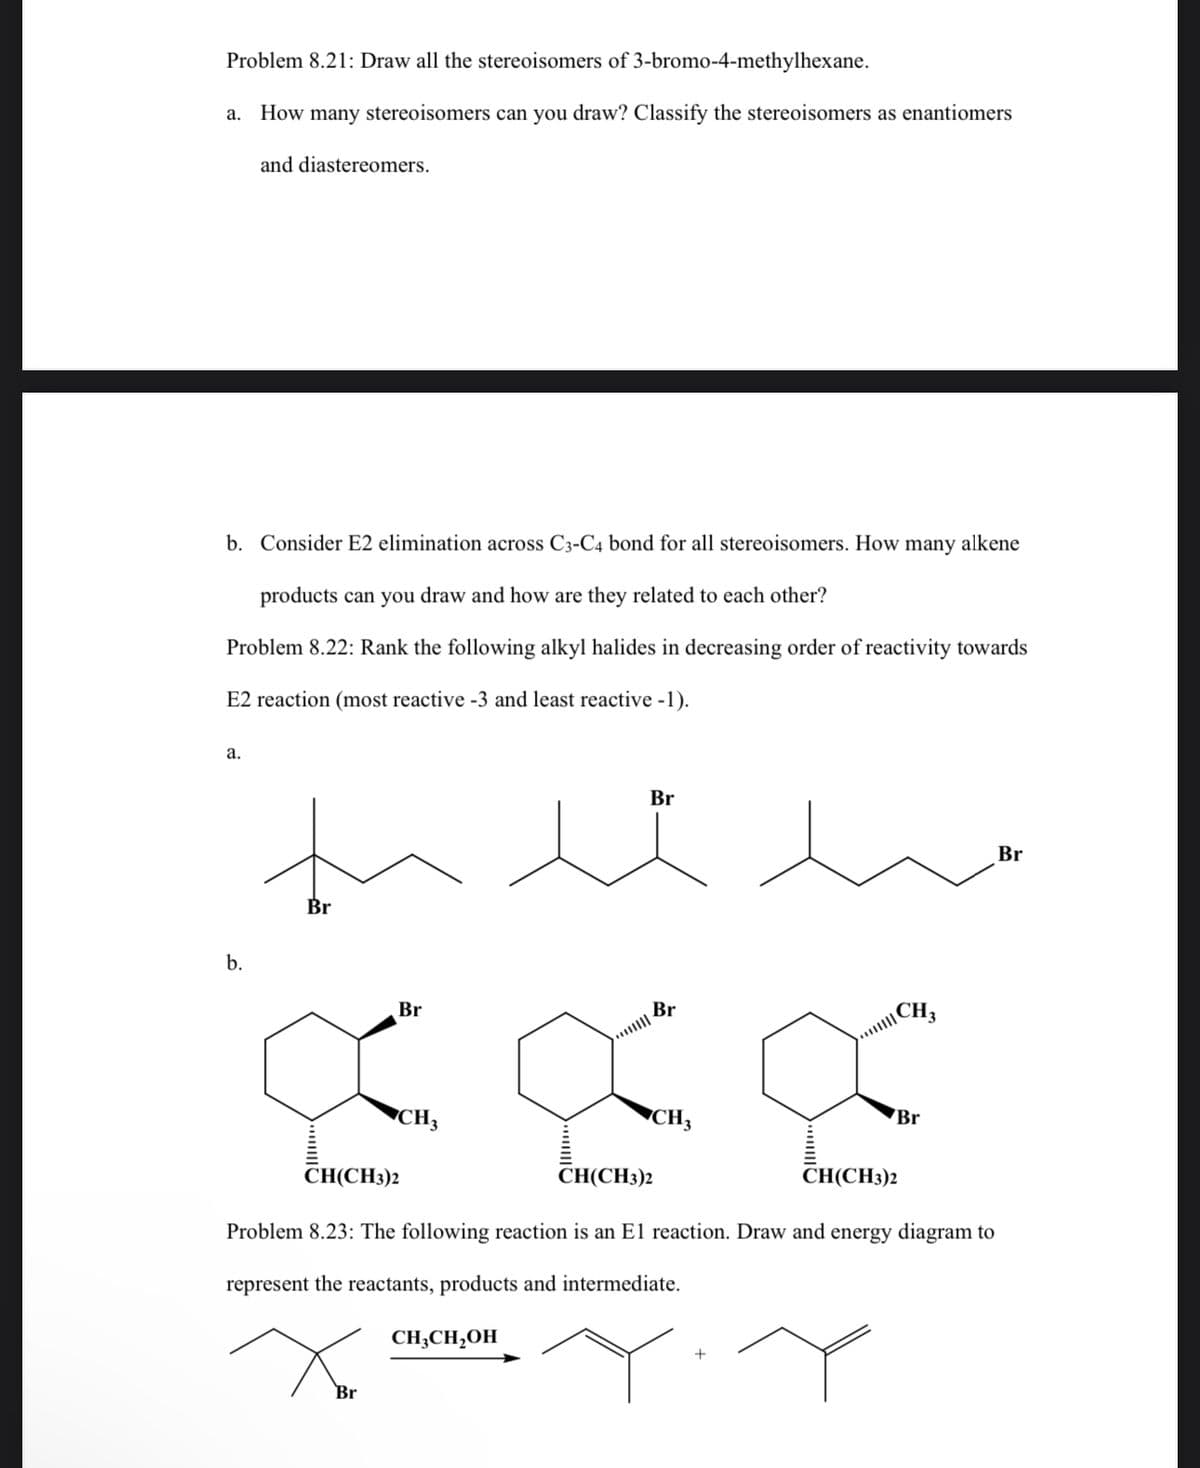 Problem 8.21: Draw all the stereoisomers of 3-bromo-4-methylhexane.
a. How many stereoisomers can you draw? Classify the stereoisomers as enantiomers
and diastereomers.
b. Consider E2 elimination across C3-C4 bond for all stereoisomers. How many alkene
products can you draw and how are they related to each other?
Problem 8.22: Rank the following alkyl halides in decreasing order of reactivity towards
E2 reaction (most reactive -3 and least reactive -1).
a.
b.
Br
Br
CH3
CH(CH3)2
Br
CH3CH2OH
Br
CH3
CH(CH3)2
CH(CH3)2
Problem 8.23: The following reaction is an E1 reaction. Draw and energy diagram to
represent the reactants, products and intermediate.
Xor
CH3
+
Br
Br